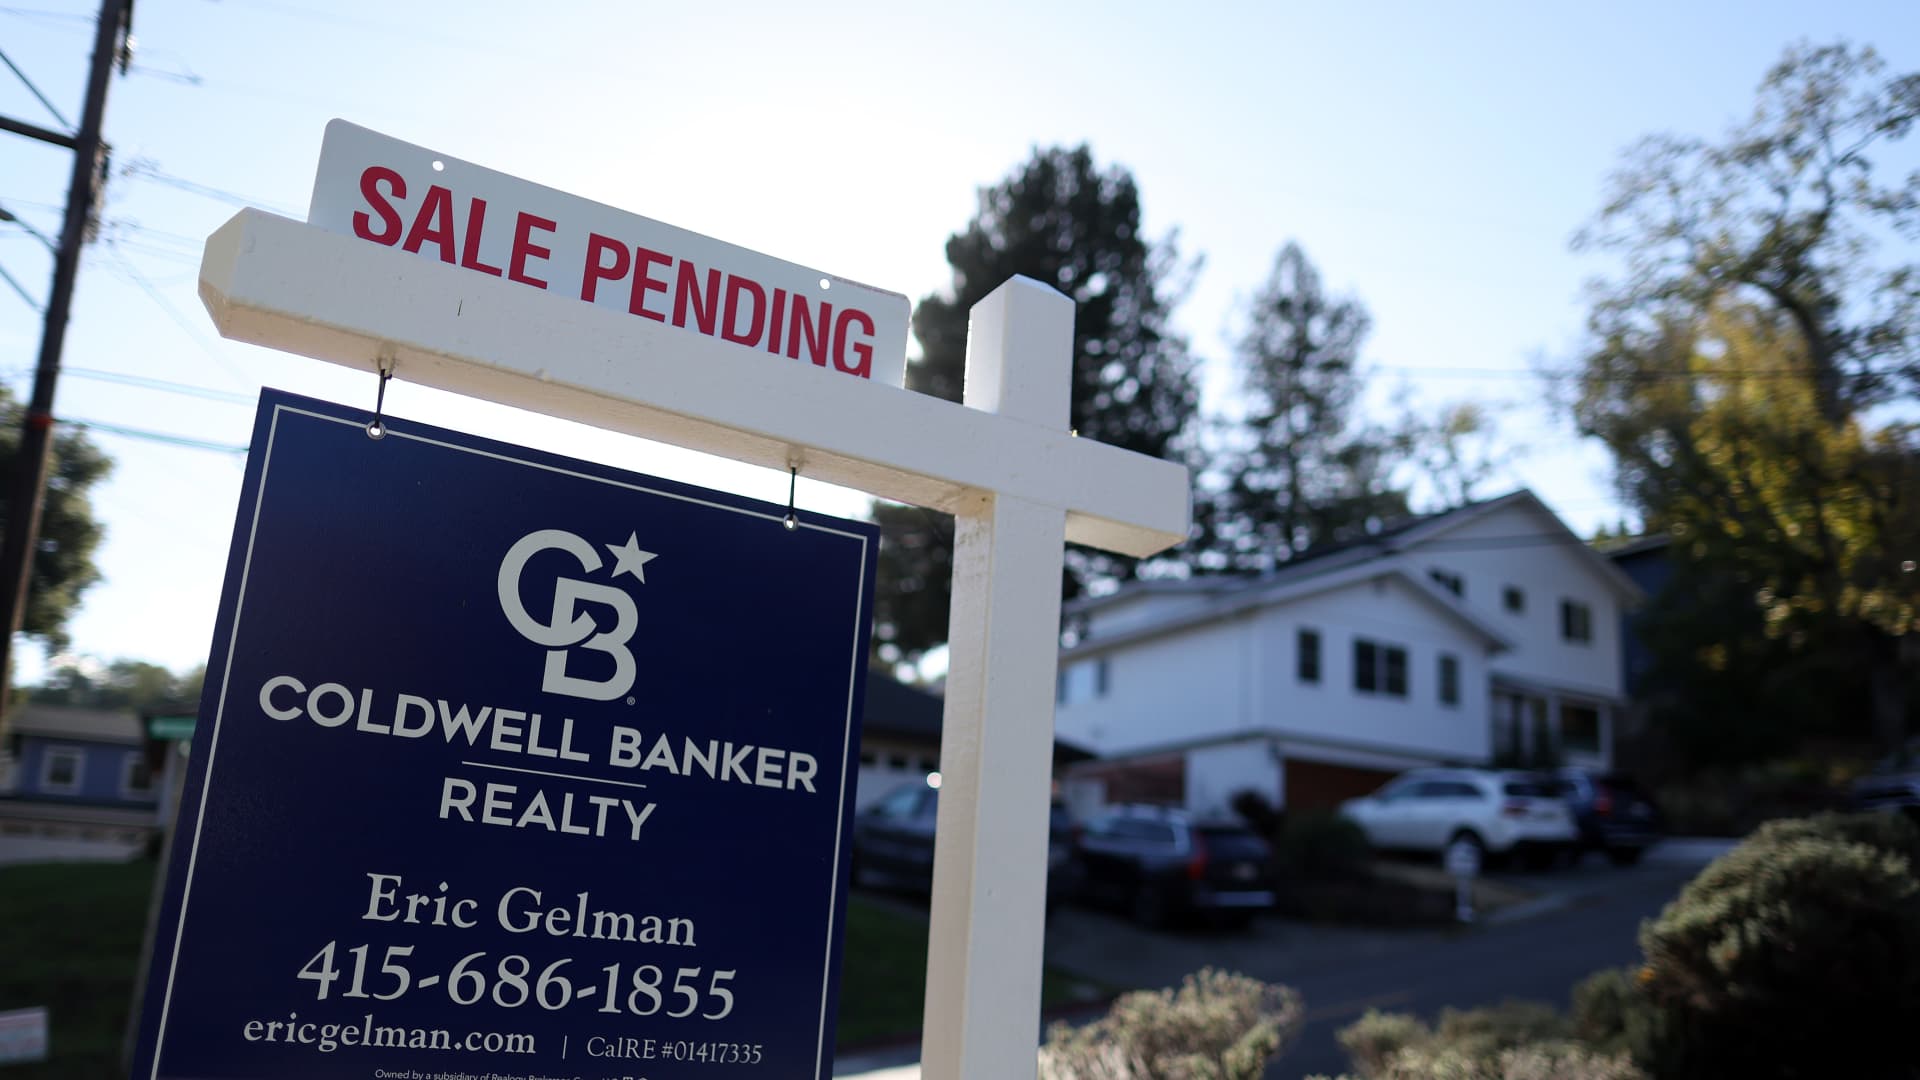 November pending home sales unchanged, despite lower mortgage rates